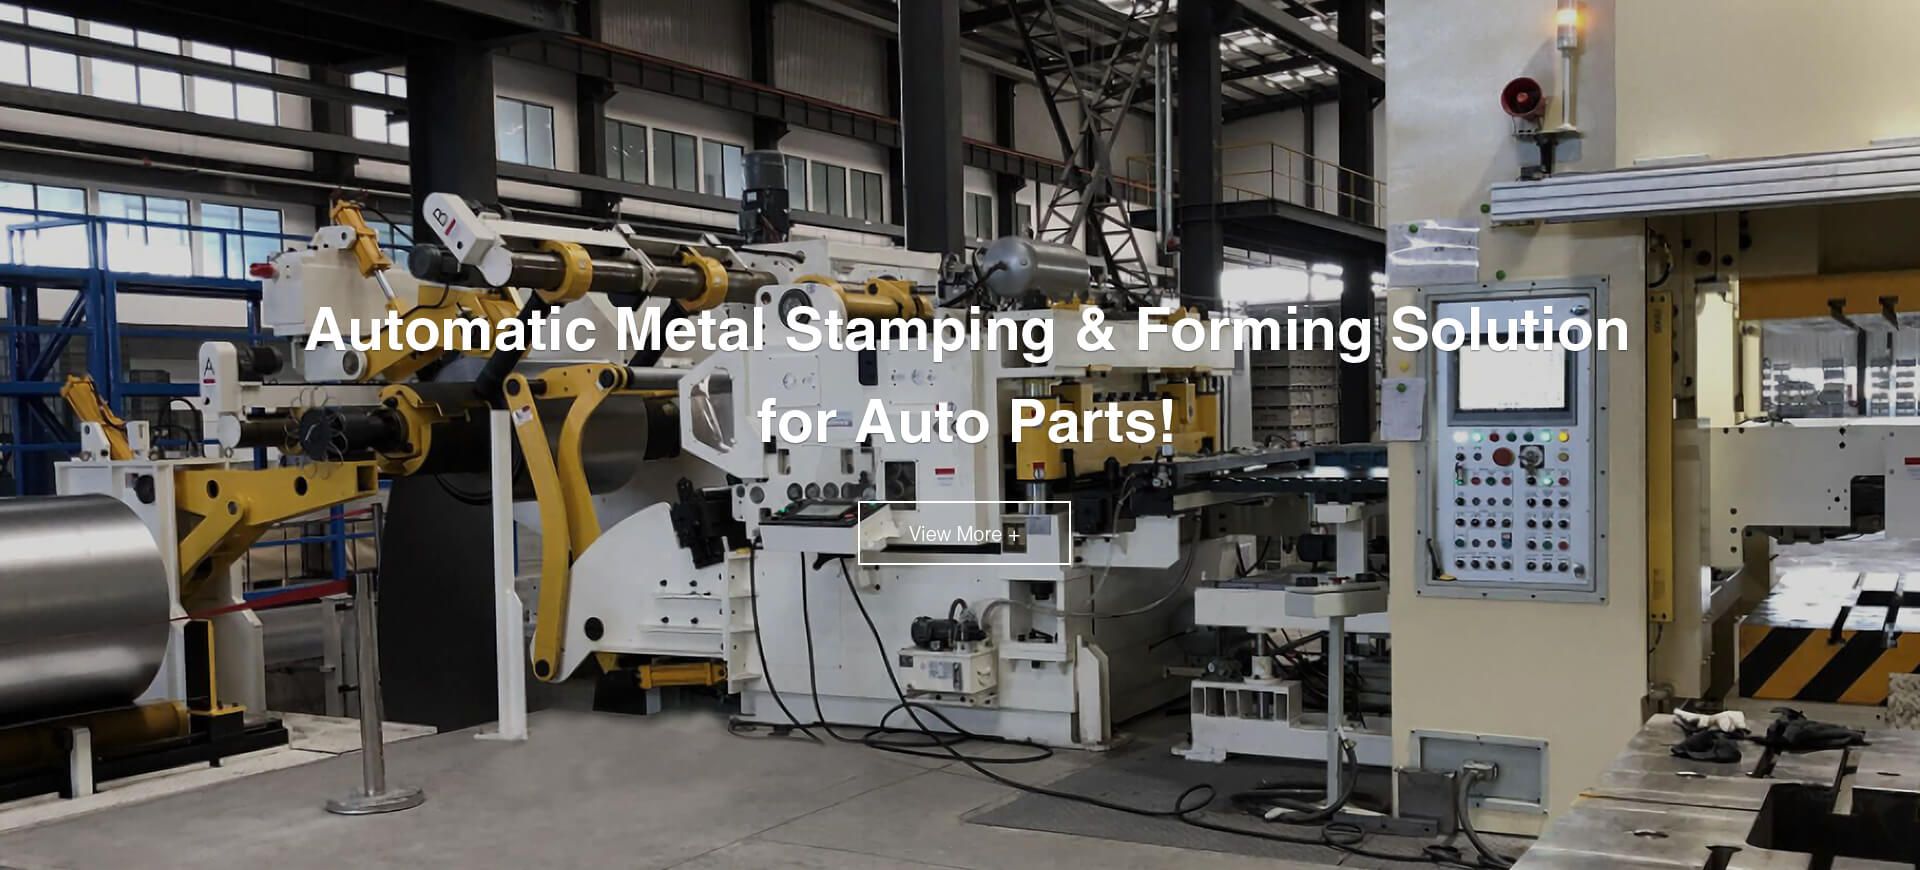 Automatic Metal Stamping & Forming Solution for Auto Parts!